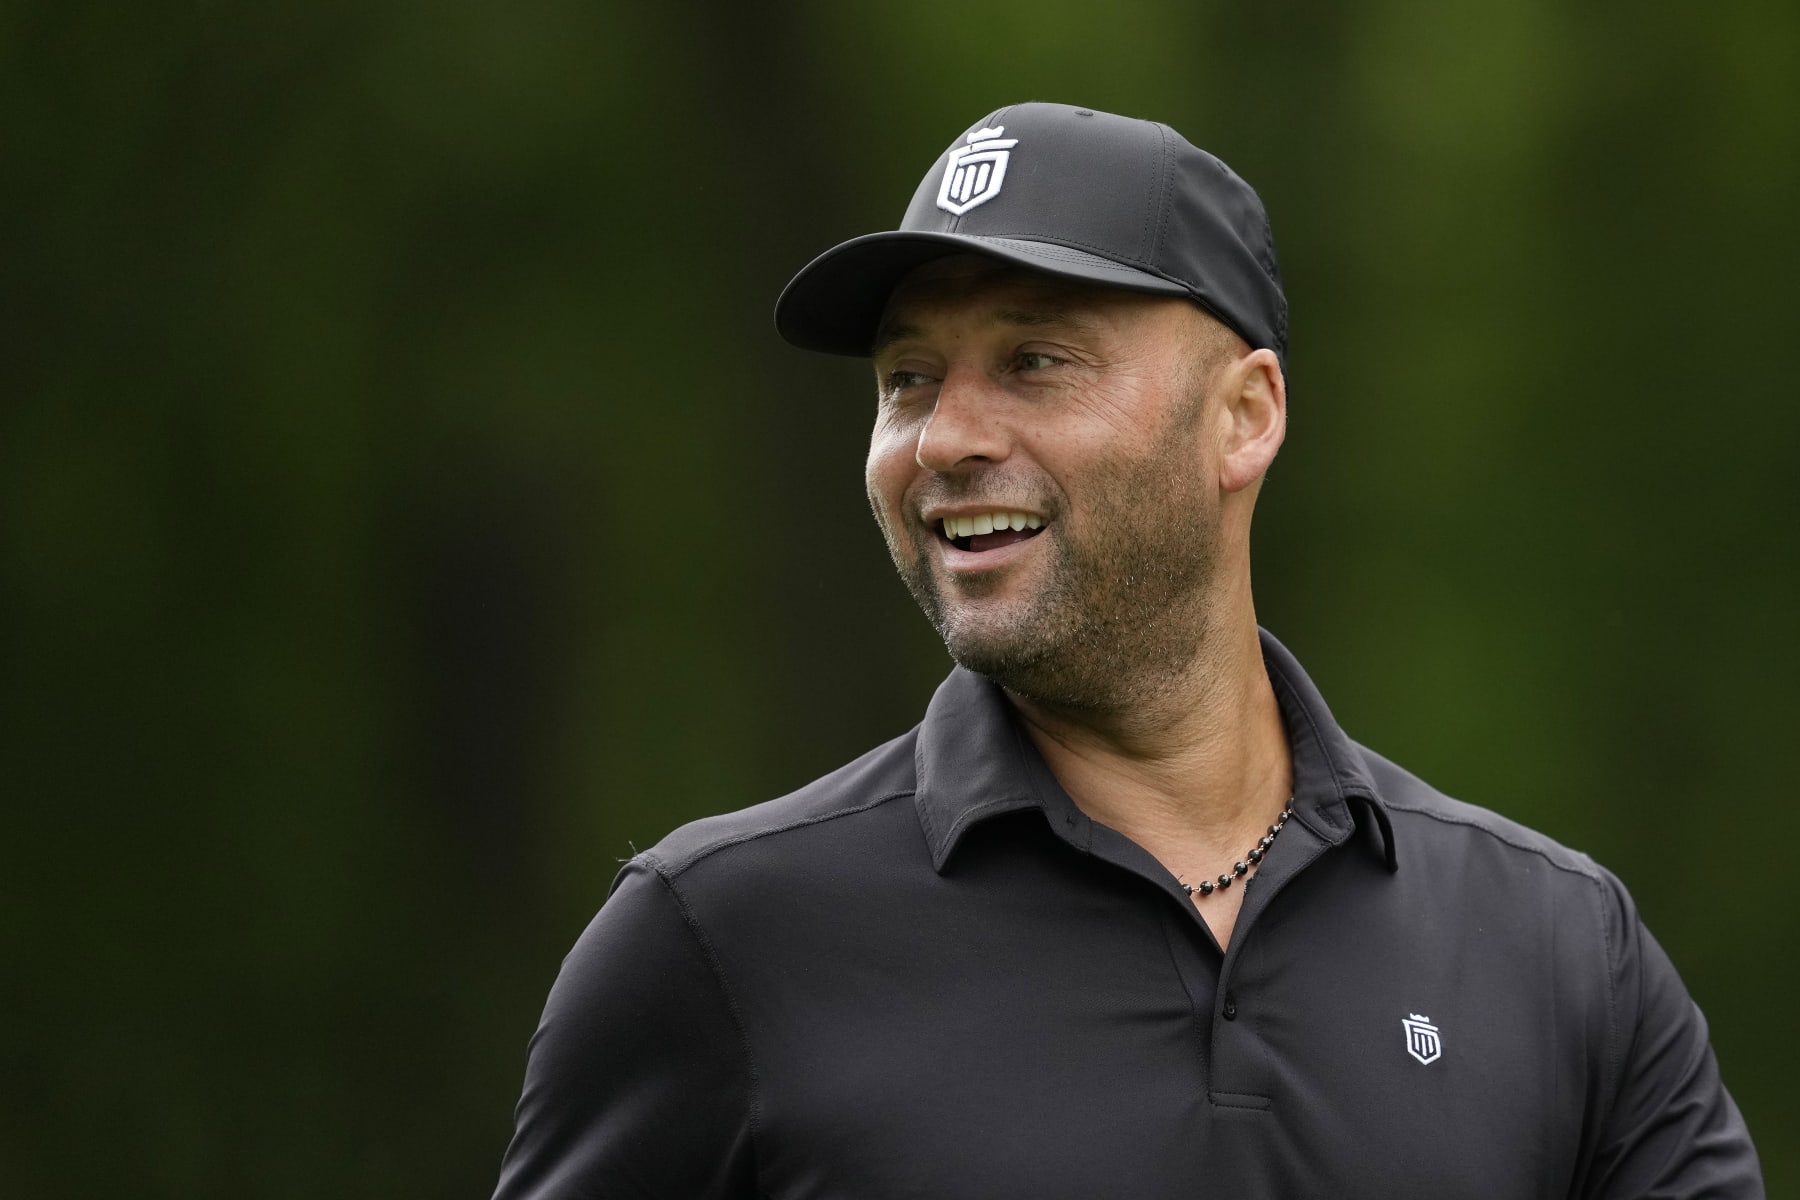 Captain Cooperstown: The start of the Jeter Dynasty